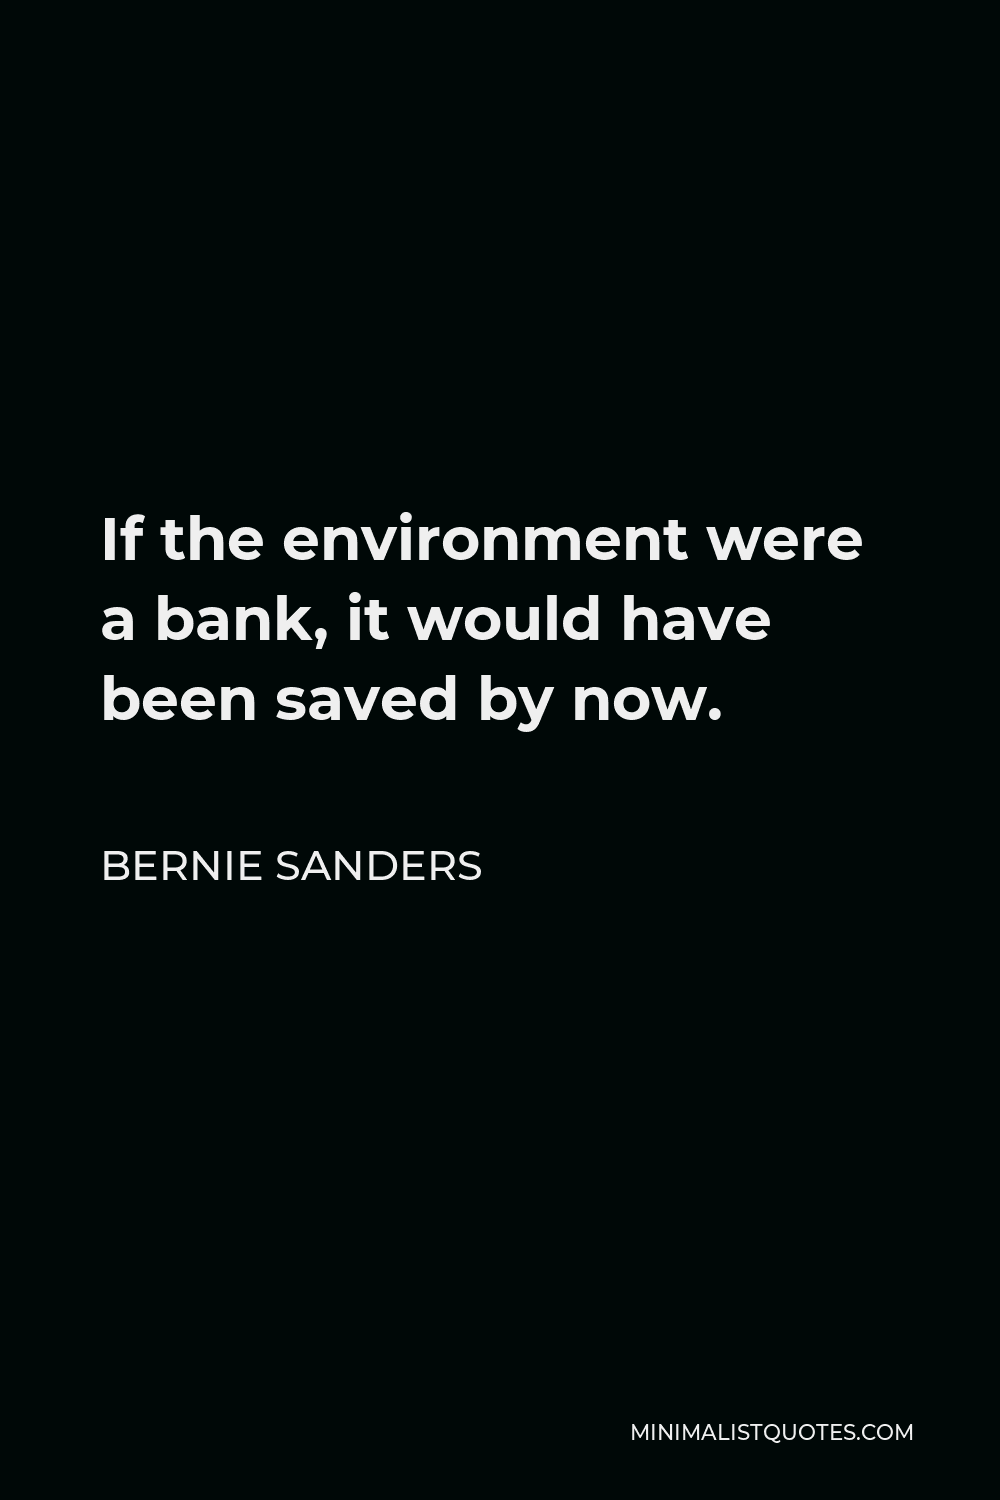 Bernie Sanders Quote - If the environment were a bank, it would have been saved by now.